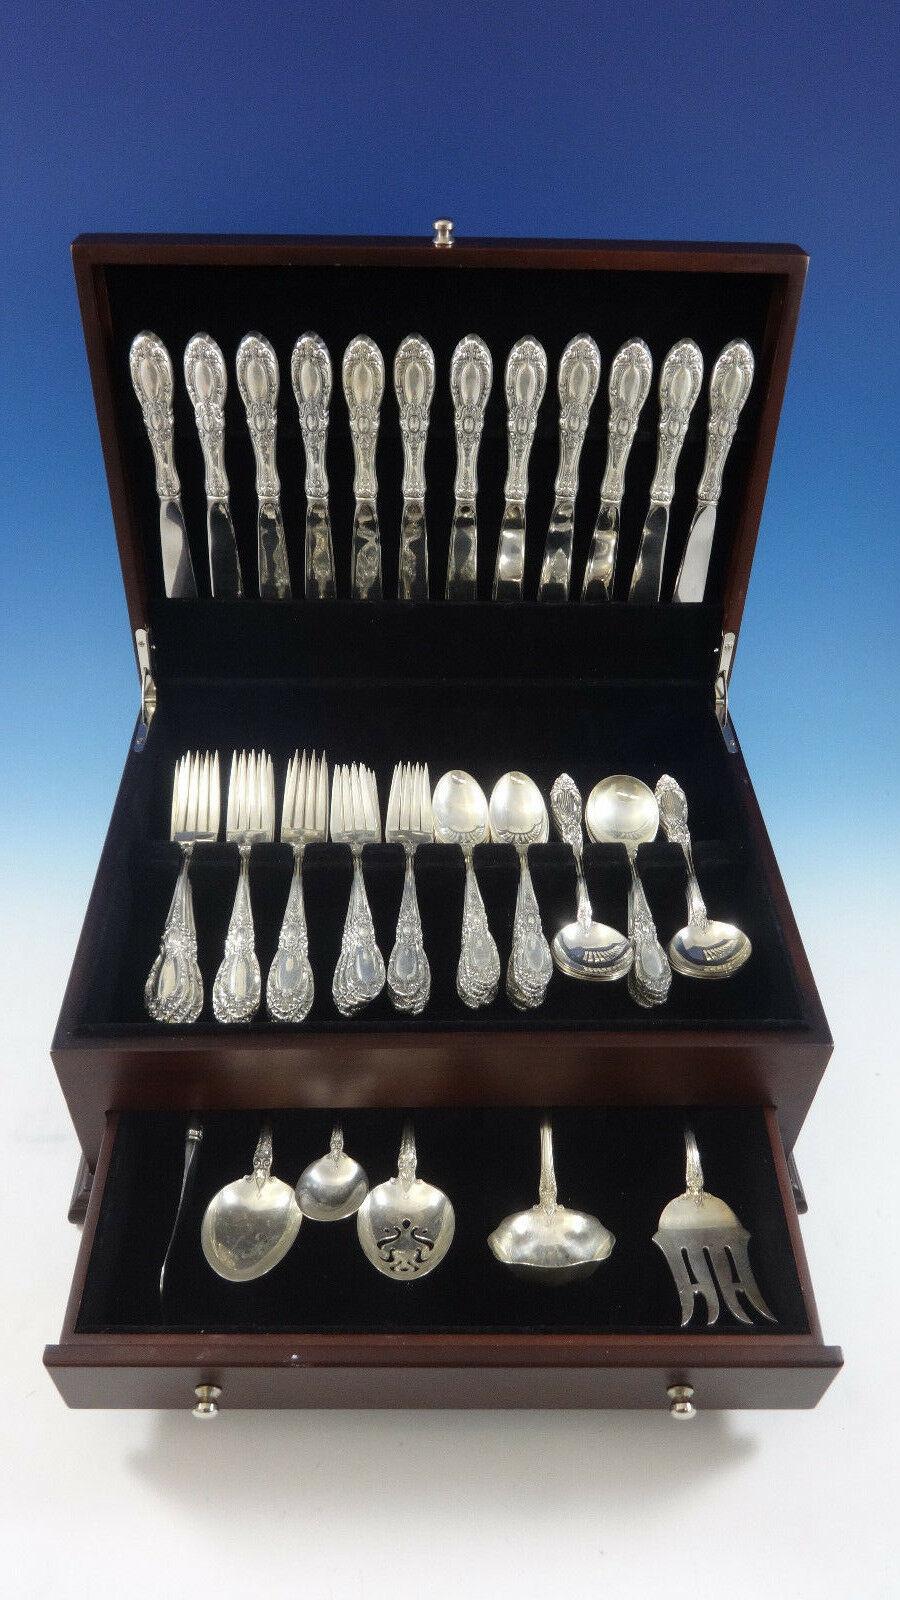 Beautiful King Richard by Towle sterling silver flatware set - 66 pieces. This set includes:

12 forks, 7 3/8